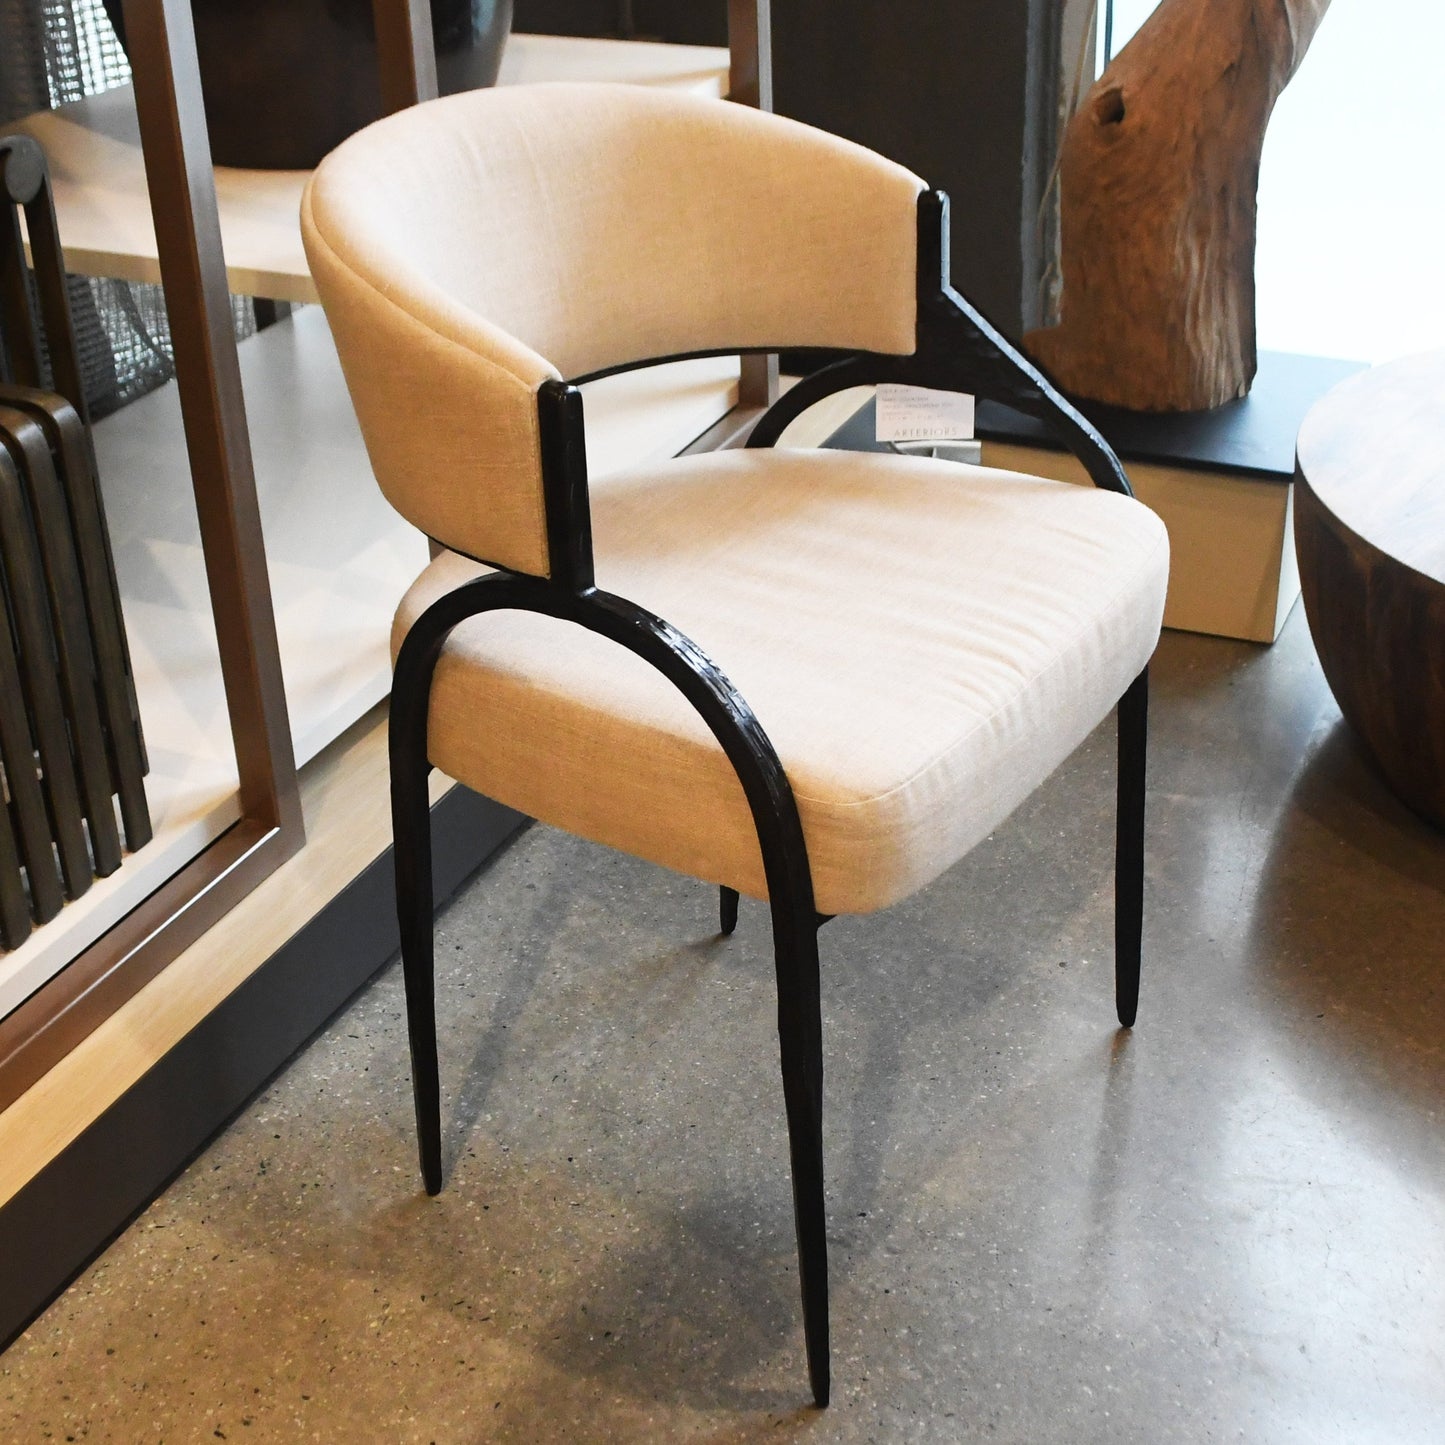 arteriors bahati chair styled at market